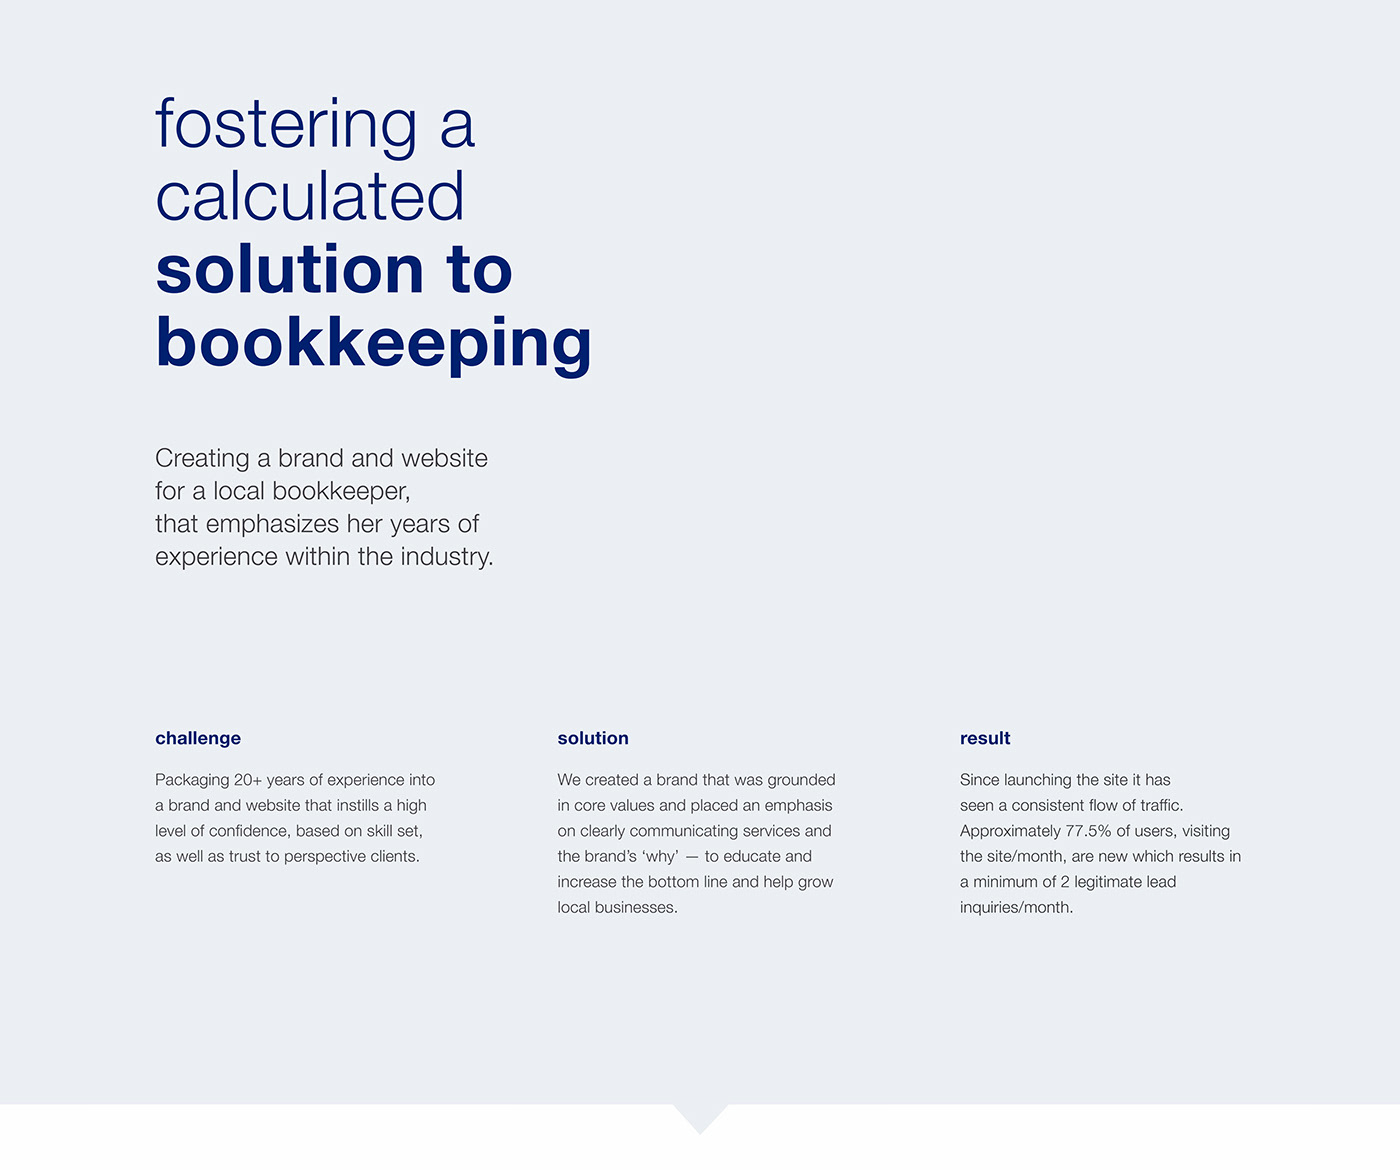 Introduction to Kimberly Kloyber Bookkeeping and the problem, solution, result.